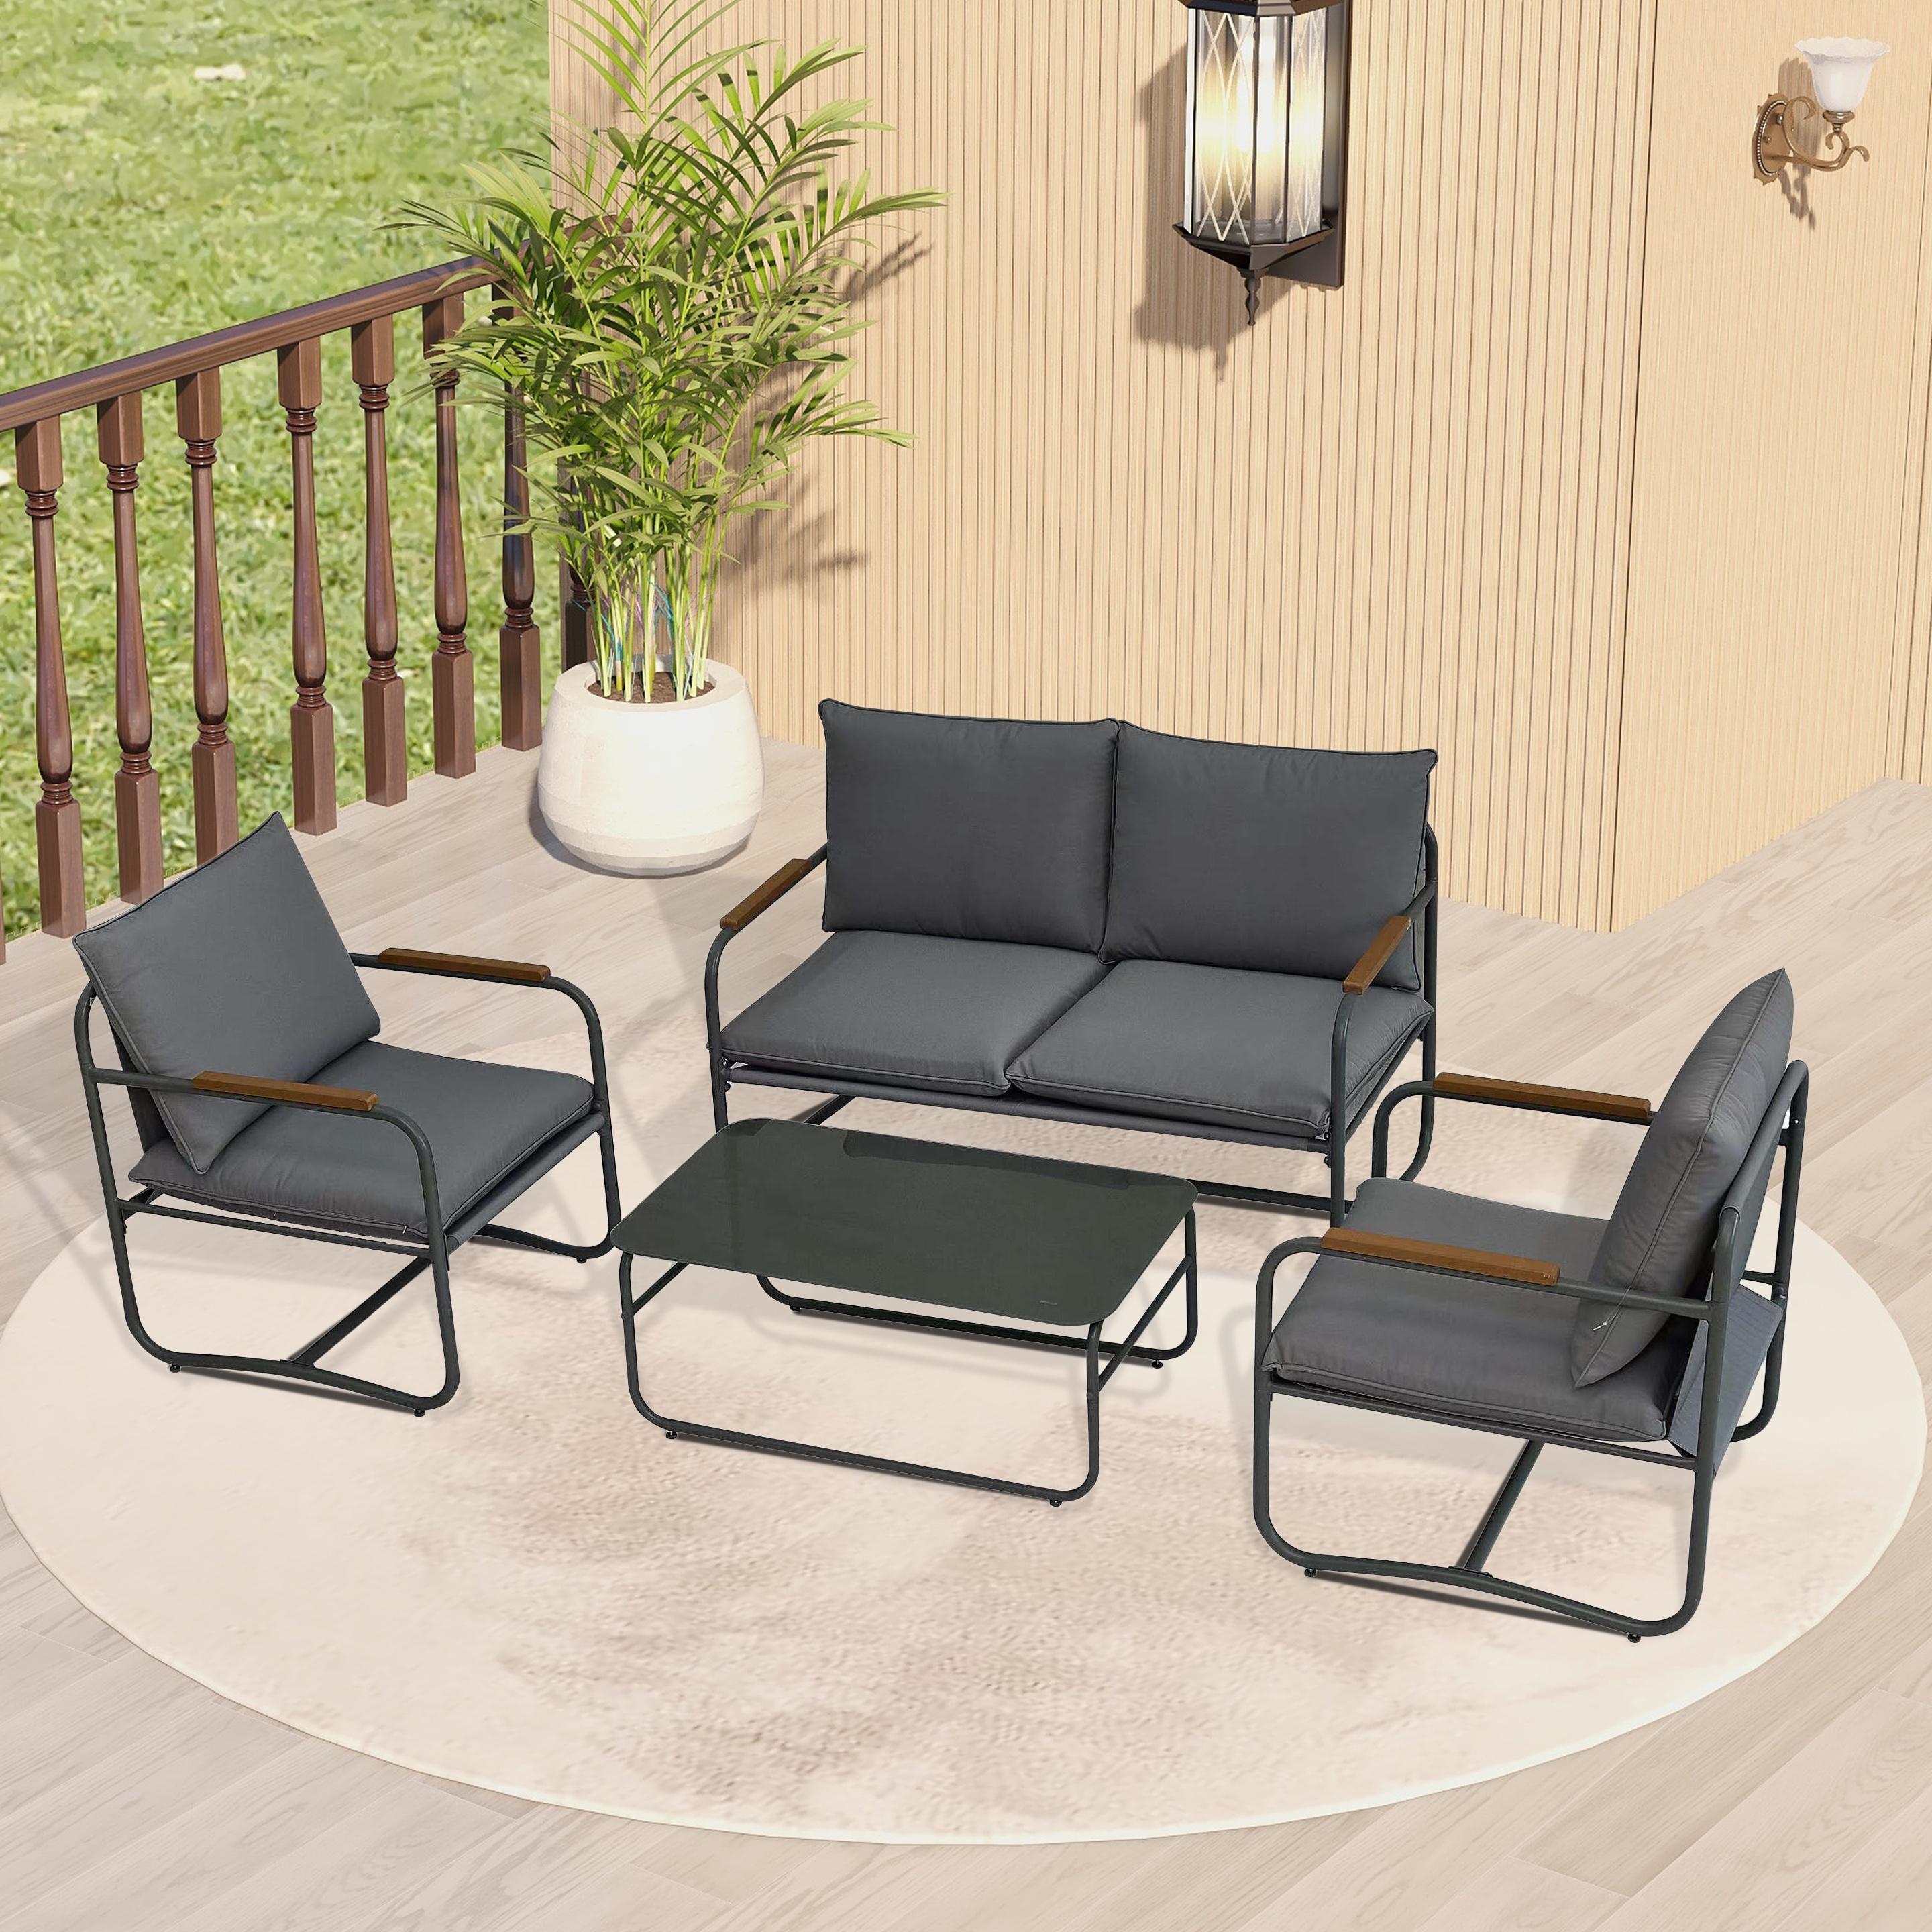 Syngar 4 Piece Patio Furniture Sets, Sectional Furniture Set for Outside, Conversation Sofa Set with Coffee Table and Dark Gray Cushions, Outdoor All Weather Metal Chairs Set for Yard, Poolside, Deck - image 1 of 7